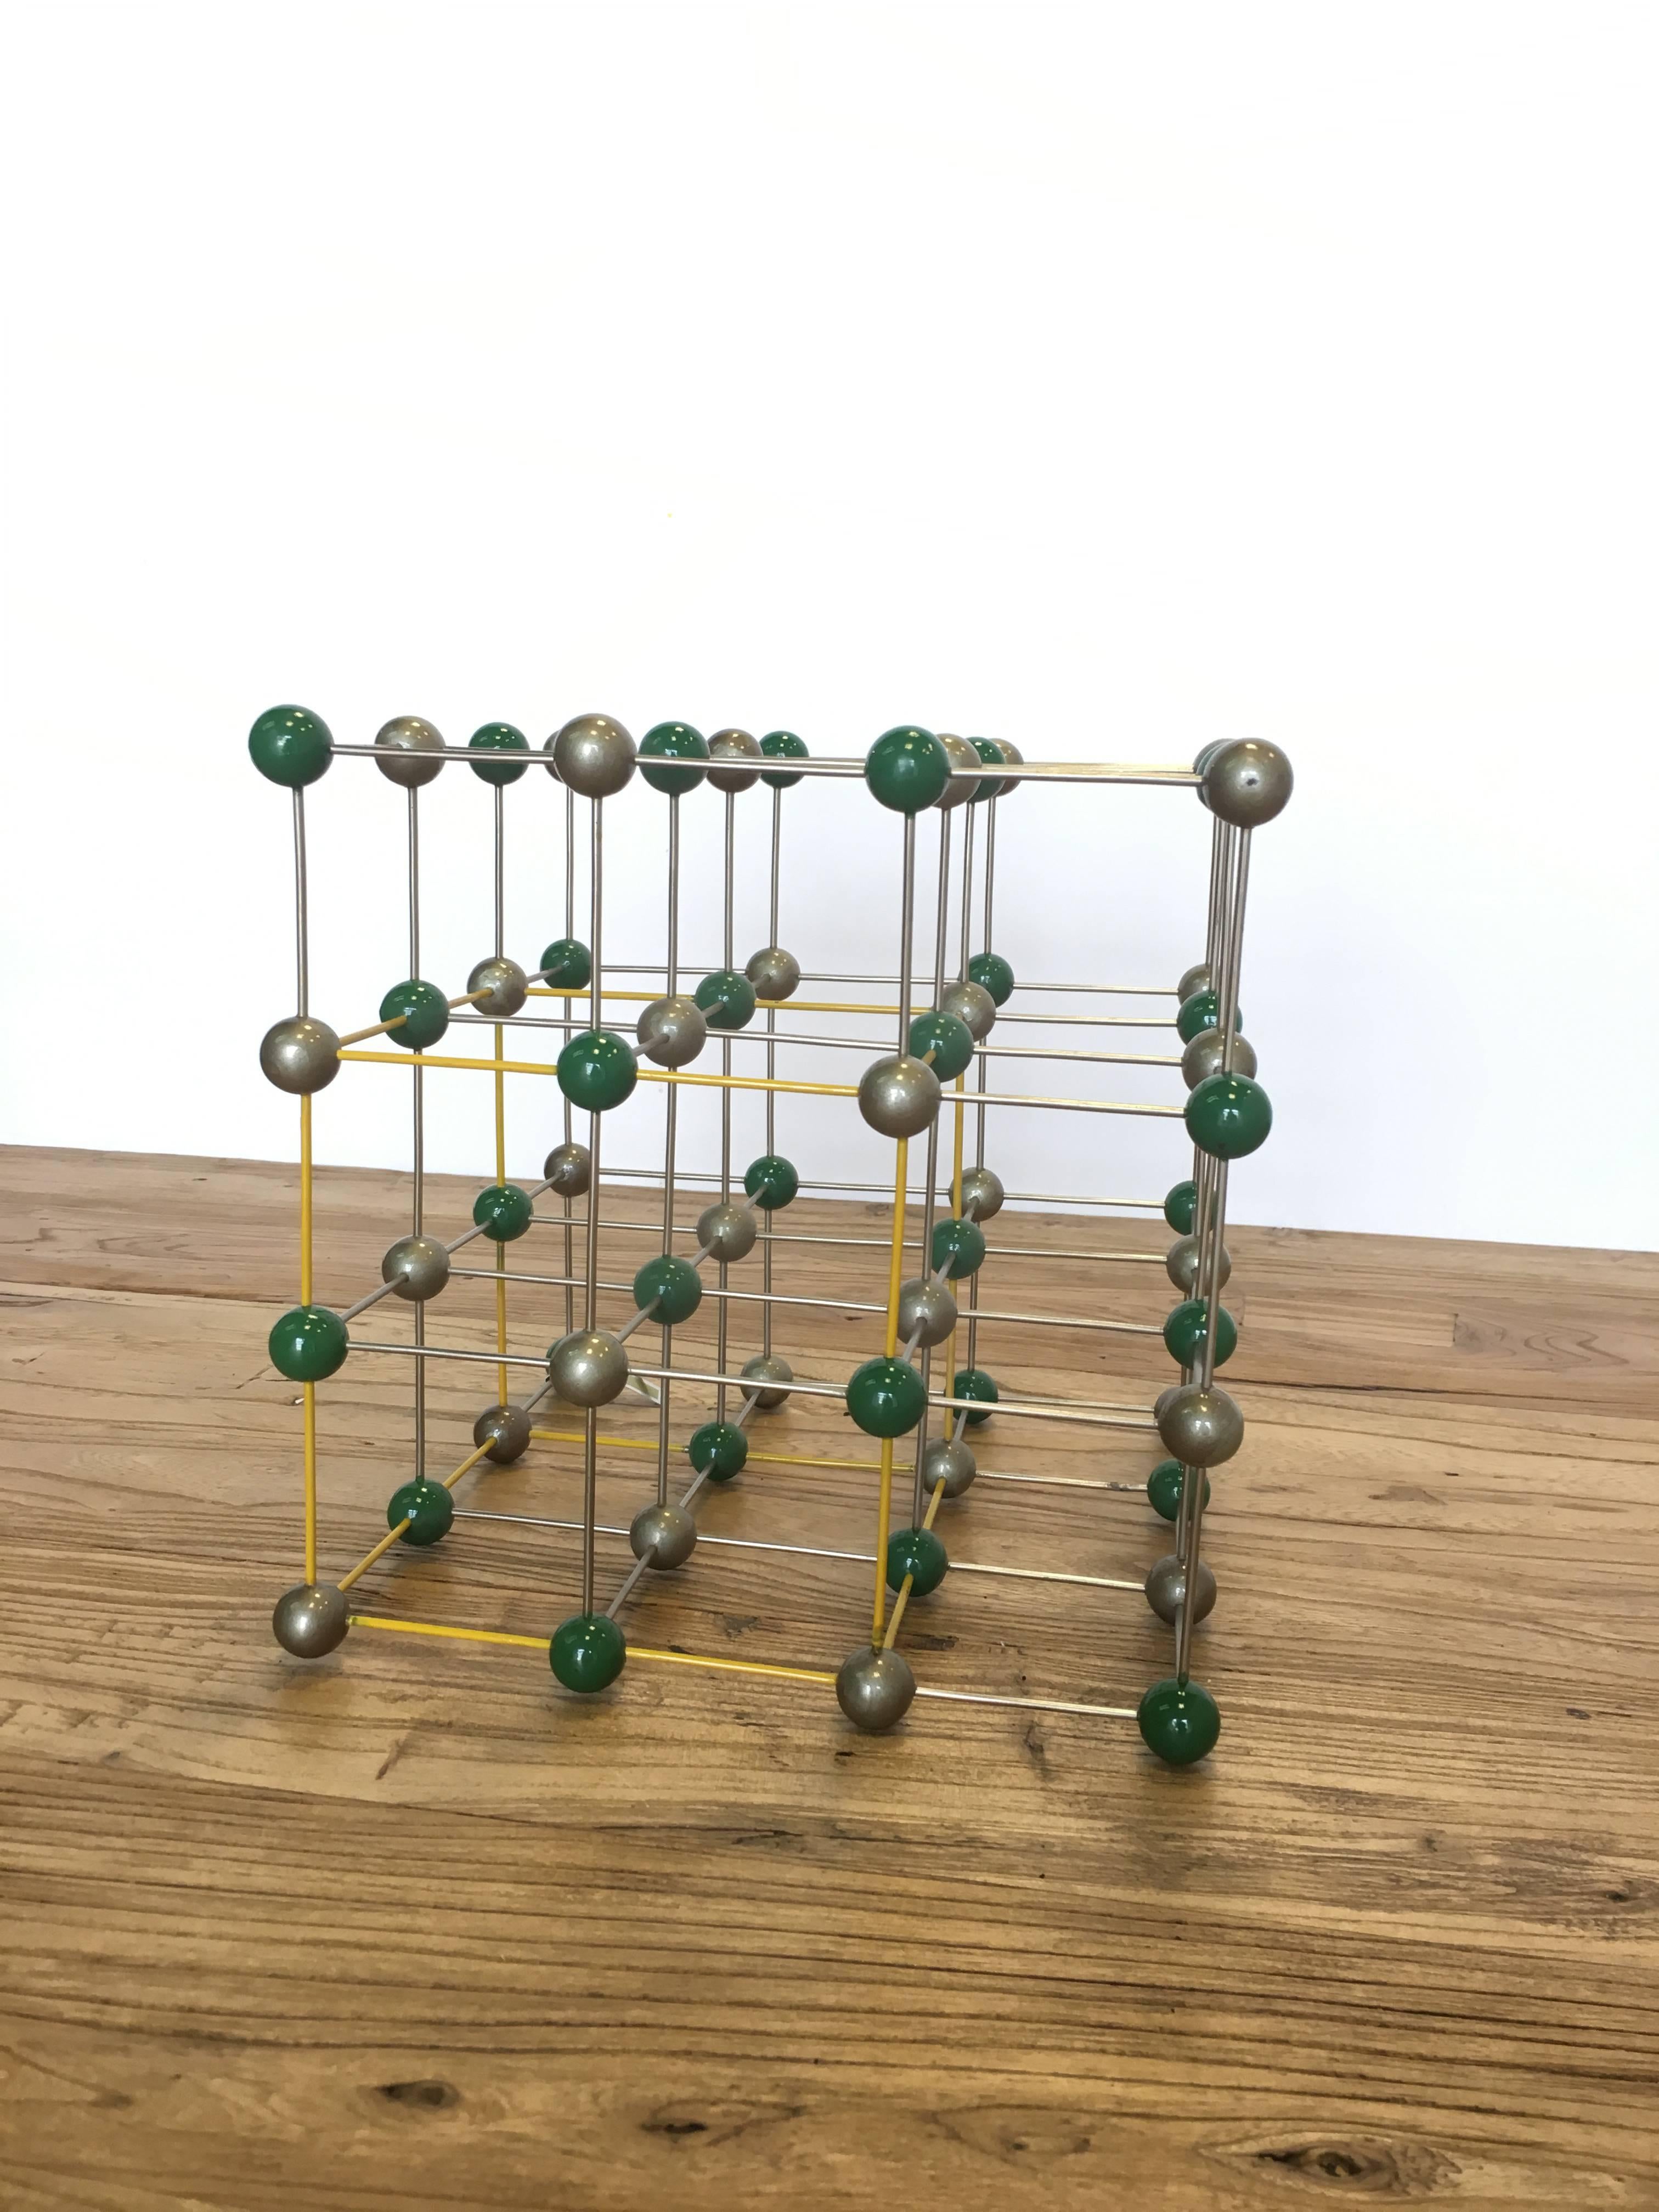 Vintage ball and stick molecular model depicting elemental structure of NaCl, salt, circa 1950s.